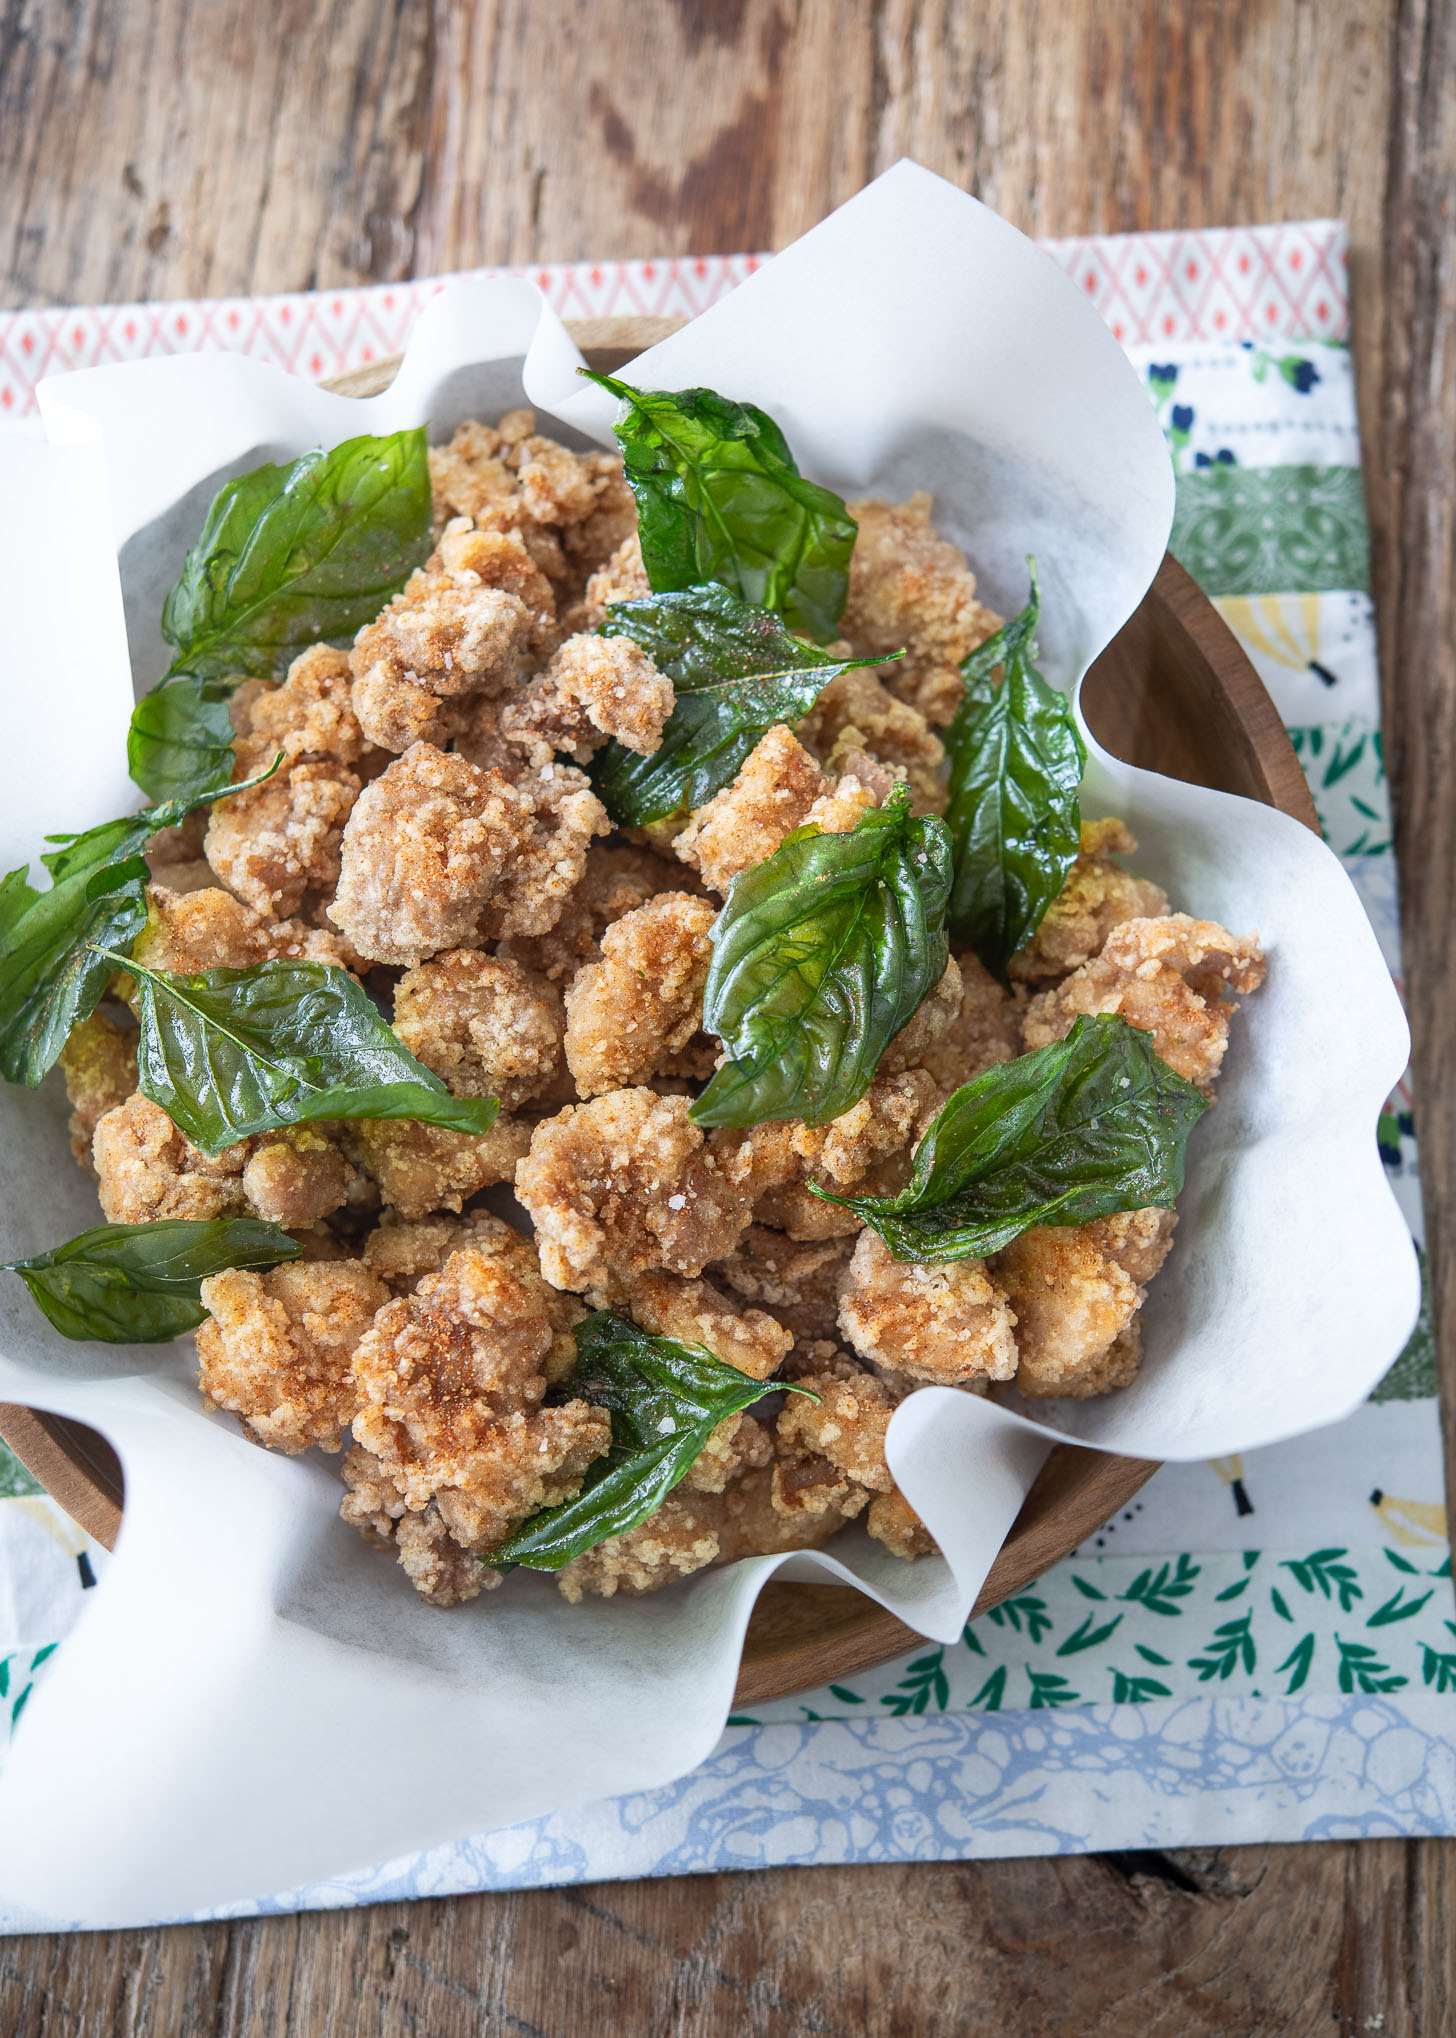 Bite-size popcorn chicken garnished with fried basil in a container.